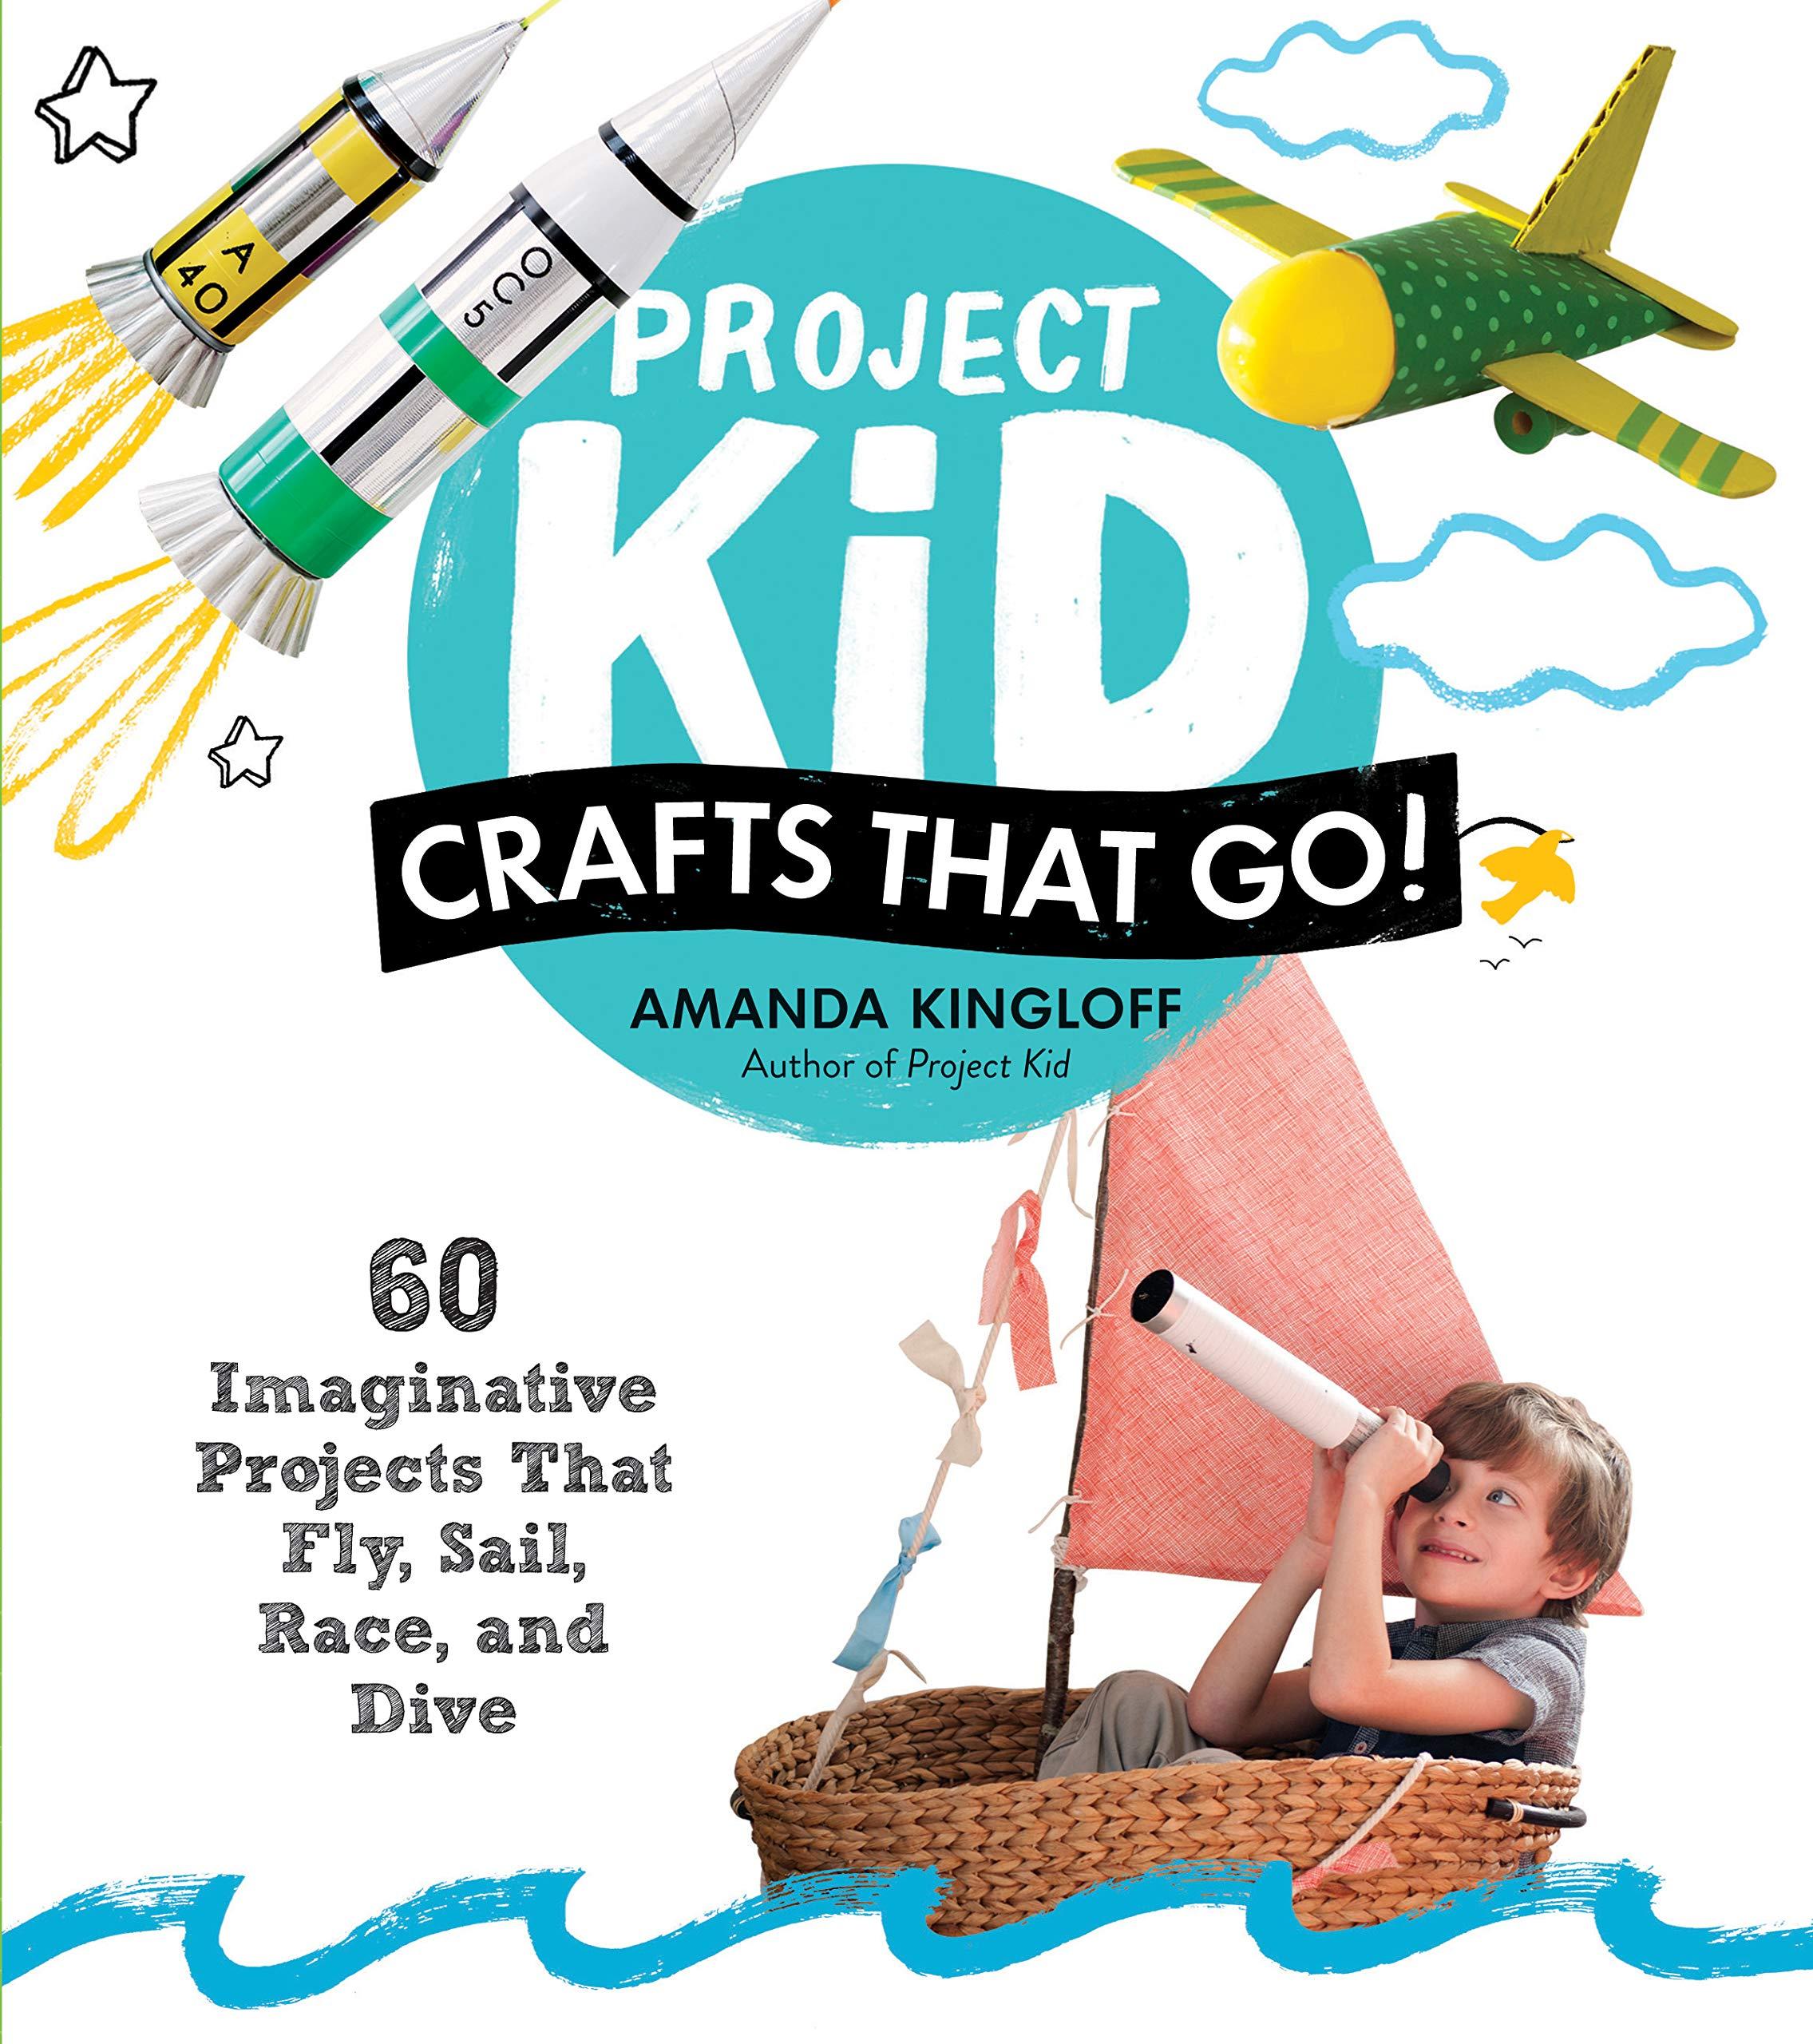 Webproject_kid_crafts_that_go!